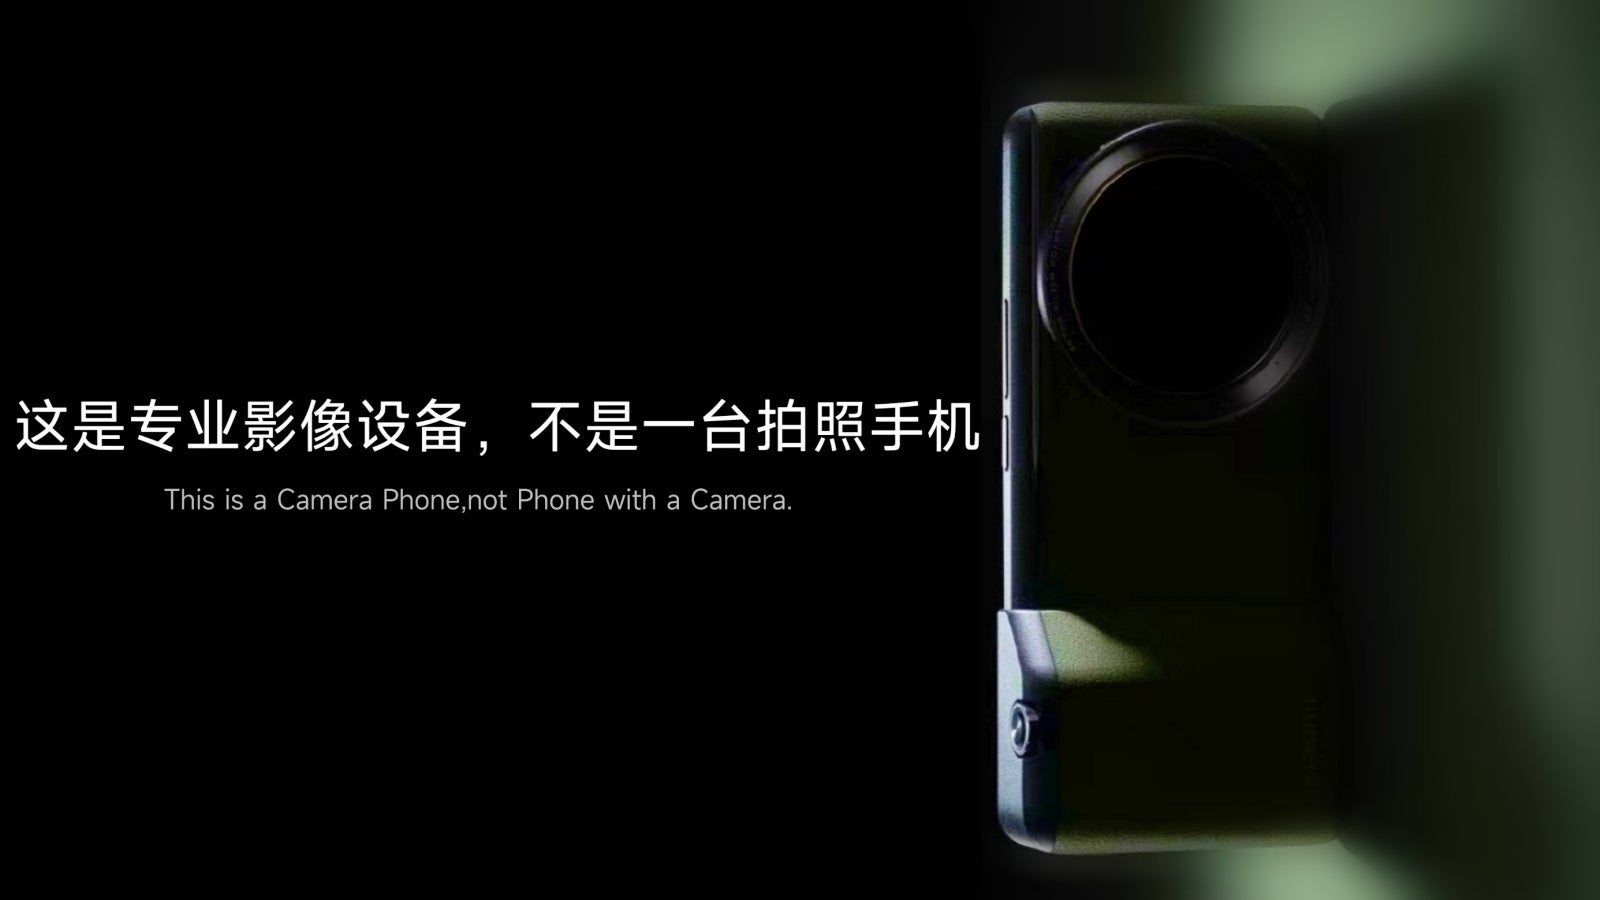 The first leaked video ad for the Xiaomi 13 Ultra quite literally says this is a camera phone - not a phone with a camera. And while the camera enthusasts in me is excited, I wish phone-makers focused on making smartphones smarter, and longer-lasting too. - Camera phones replacing Android and iPhone: People protest Samsung and Apple’s lack of innovation